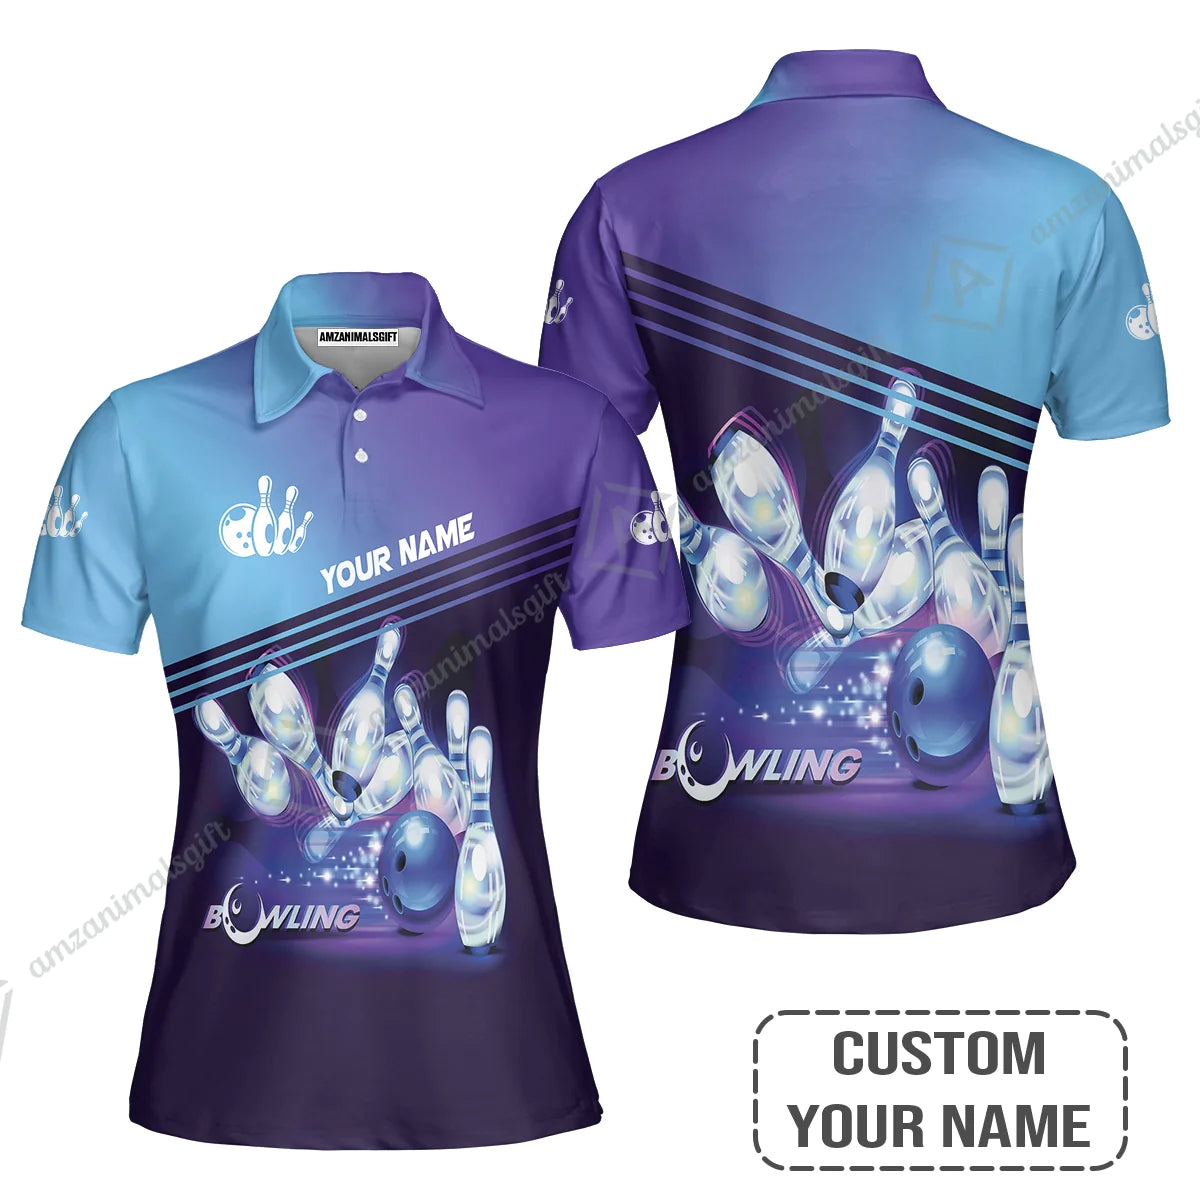 Bowling Polo Shirt With Custom Name, Personalized Blue Bowling Polo Shirt Uniform Players, Perfect Outfits For Bowling Lovers, Bowlers